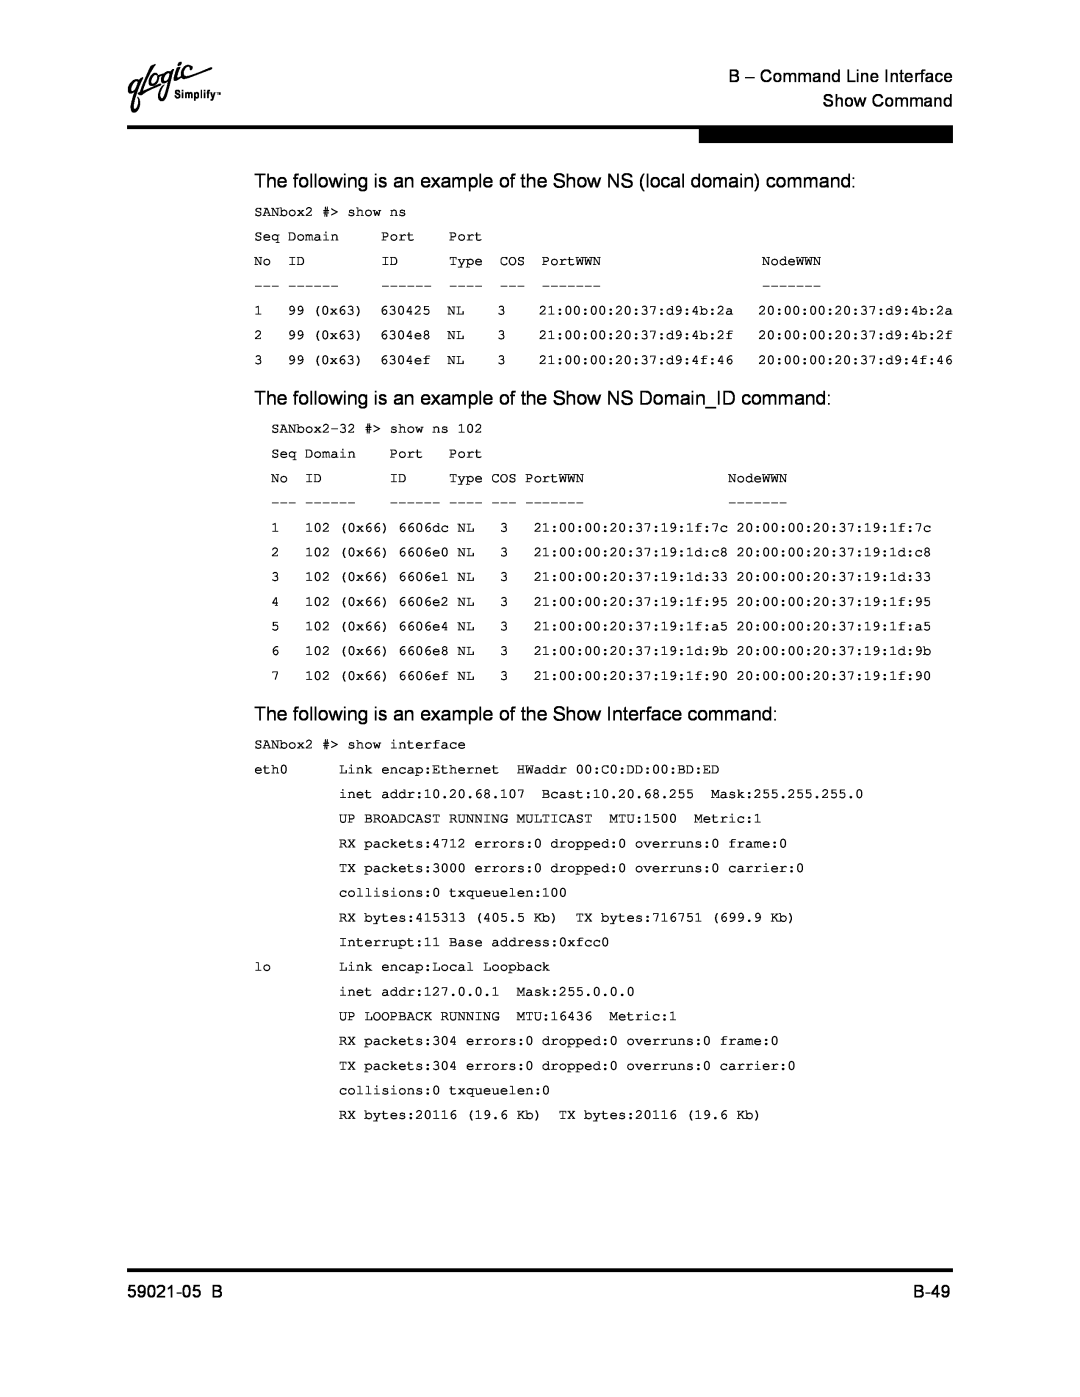 Q-Logic 59021-05 B manual The following is an example of the Show NS local domain command 